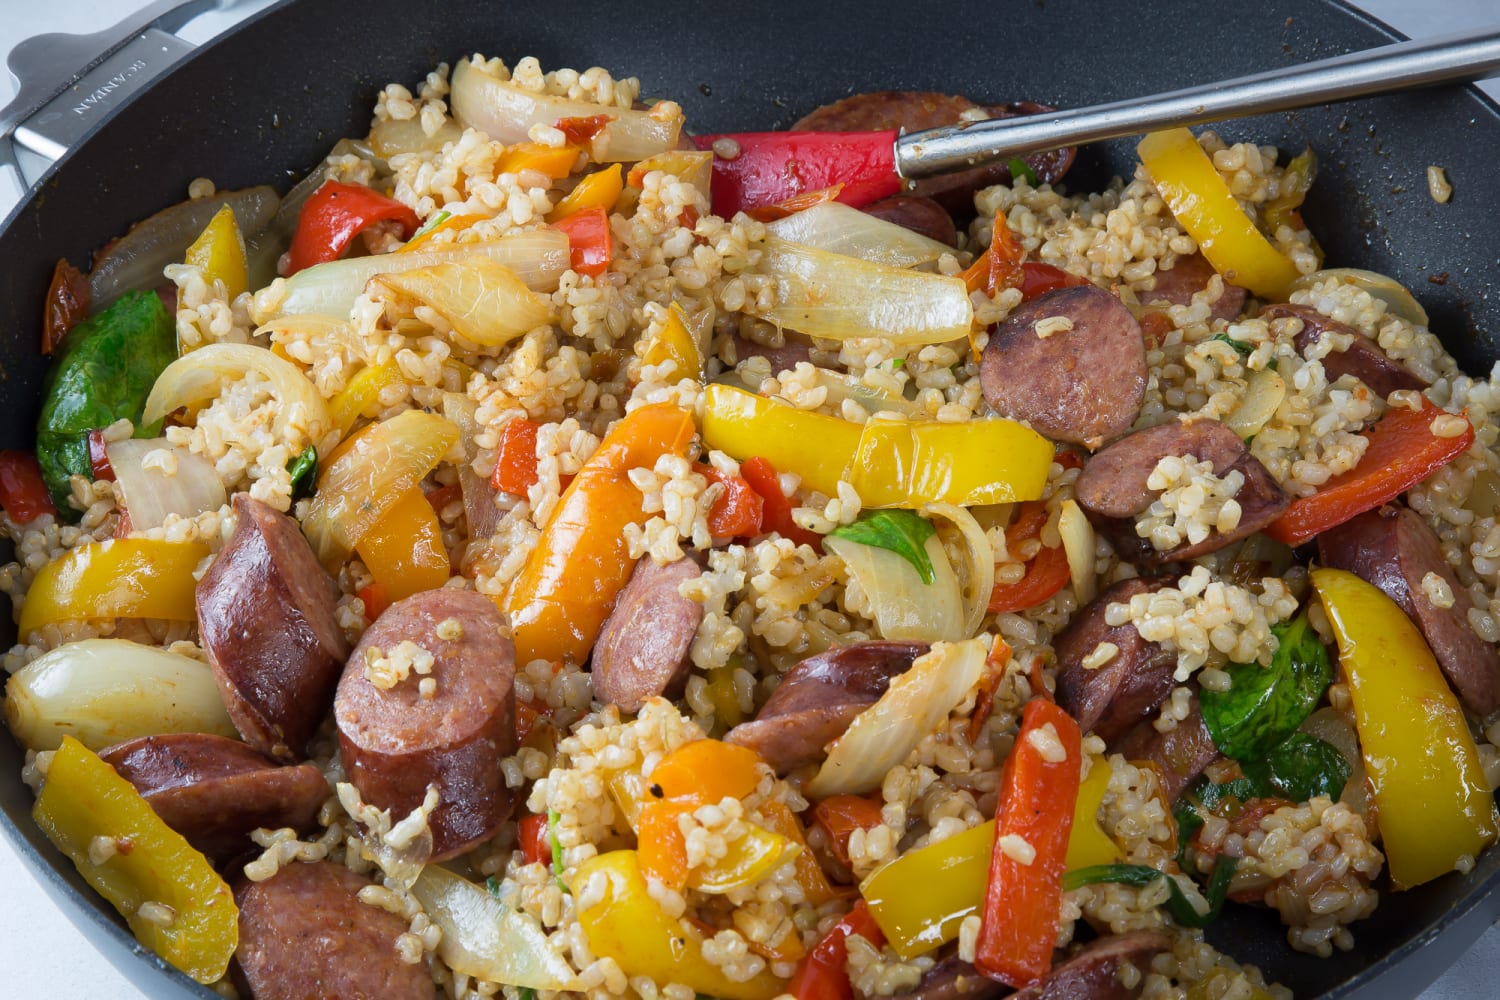 Kielbasa Vegetable Stir-Fry Recipe: Easy and quick, this 30 minute meal is amazing!